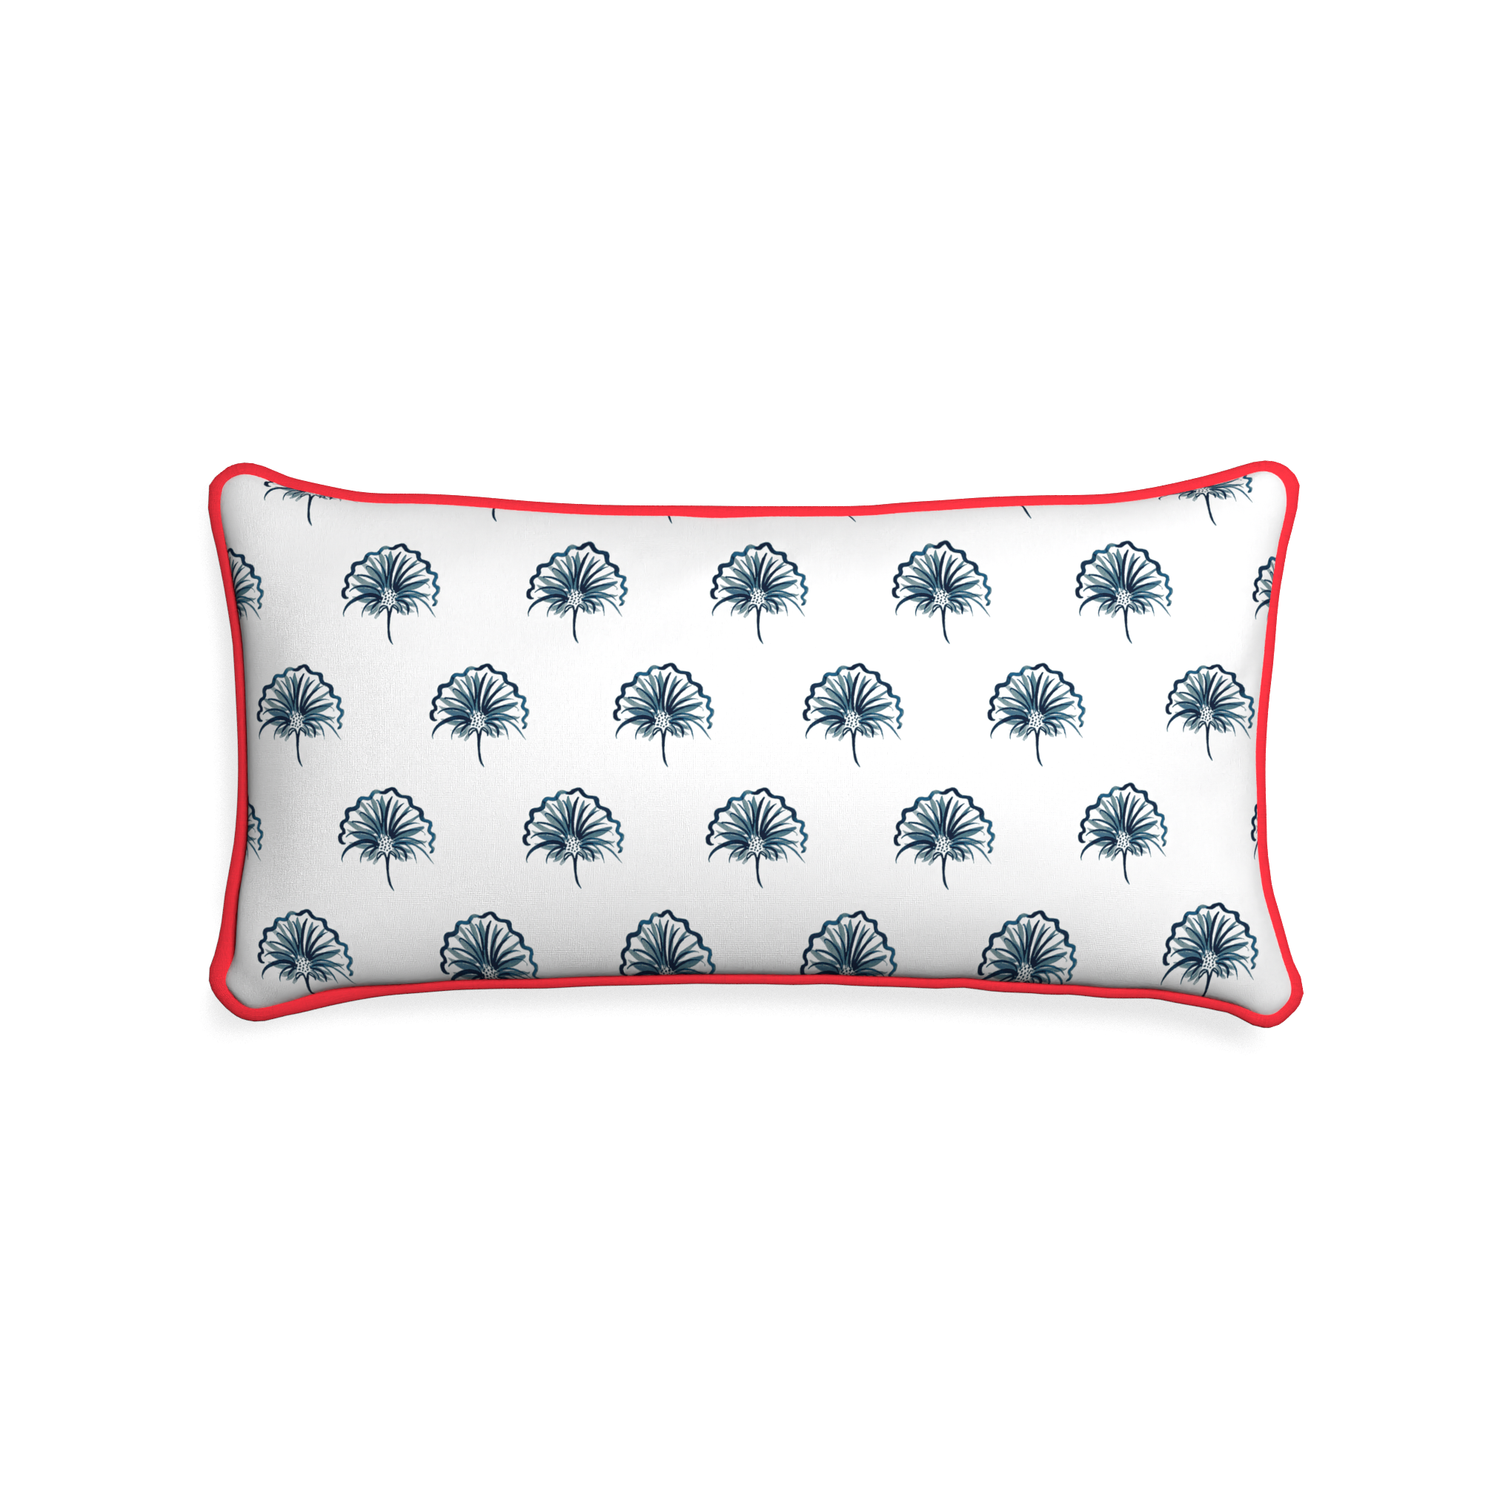 Midi-lumbar penelope midnight custom floral navypillow with cherry piping on white background